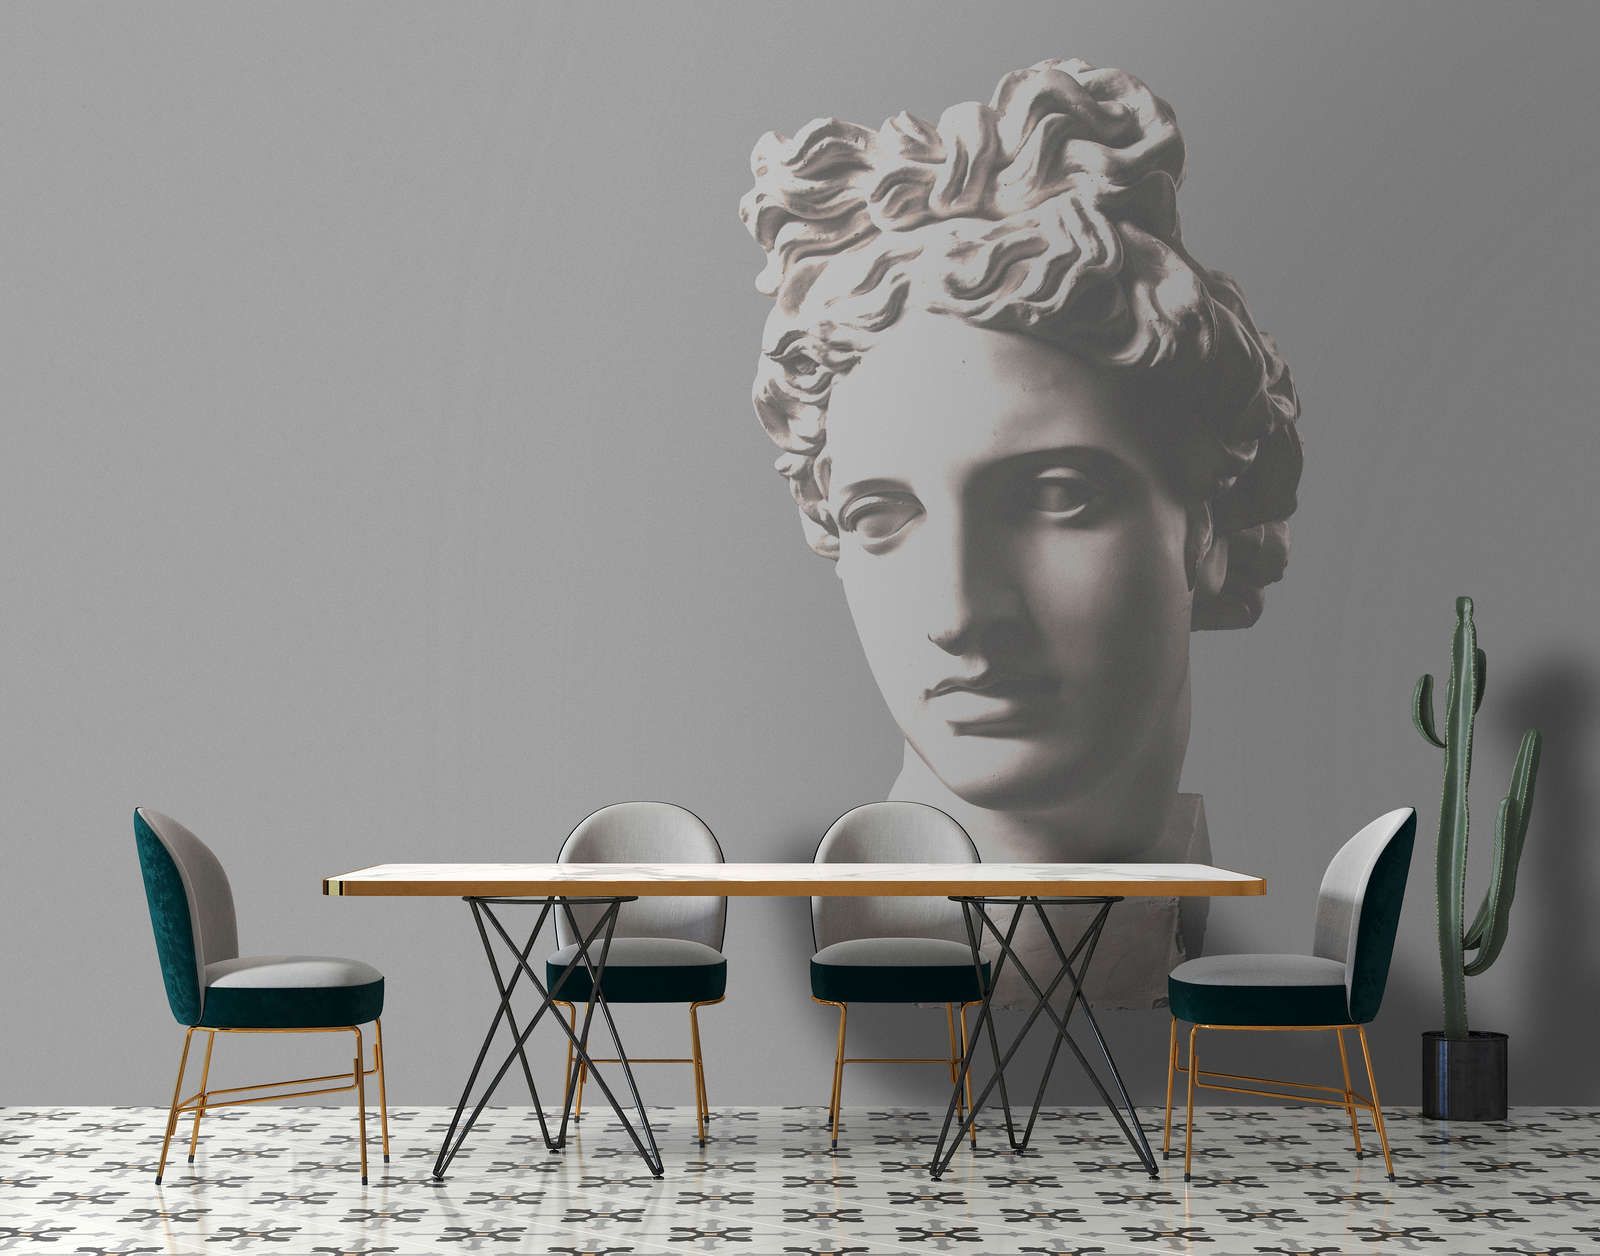             Photo wallpaper »venus« - antique female bust - Smooth, slightly pearly shimmering non-woven fabric
        